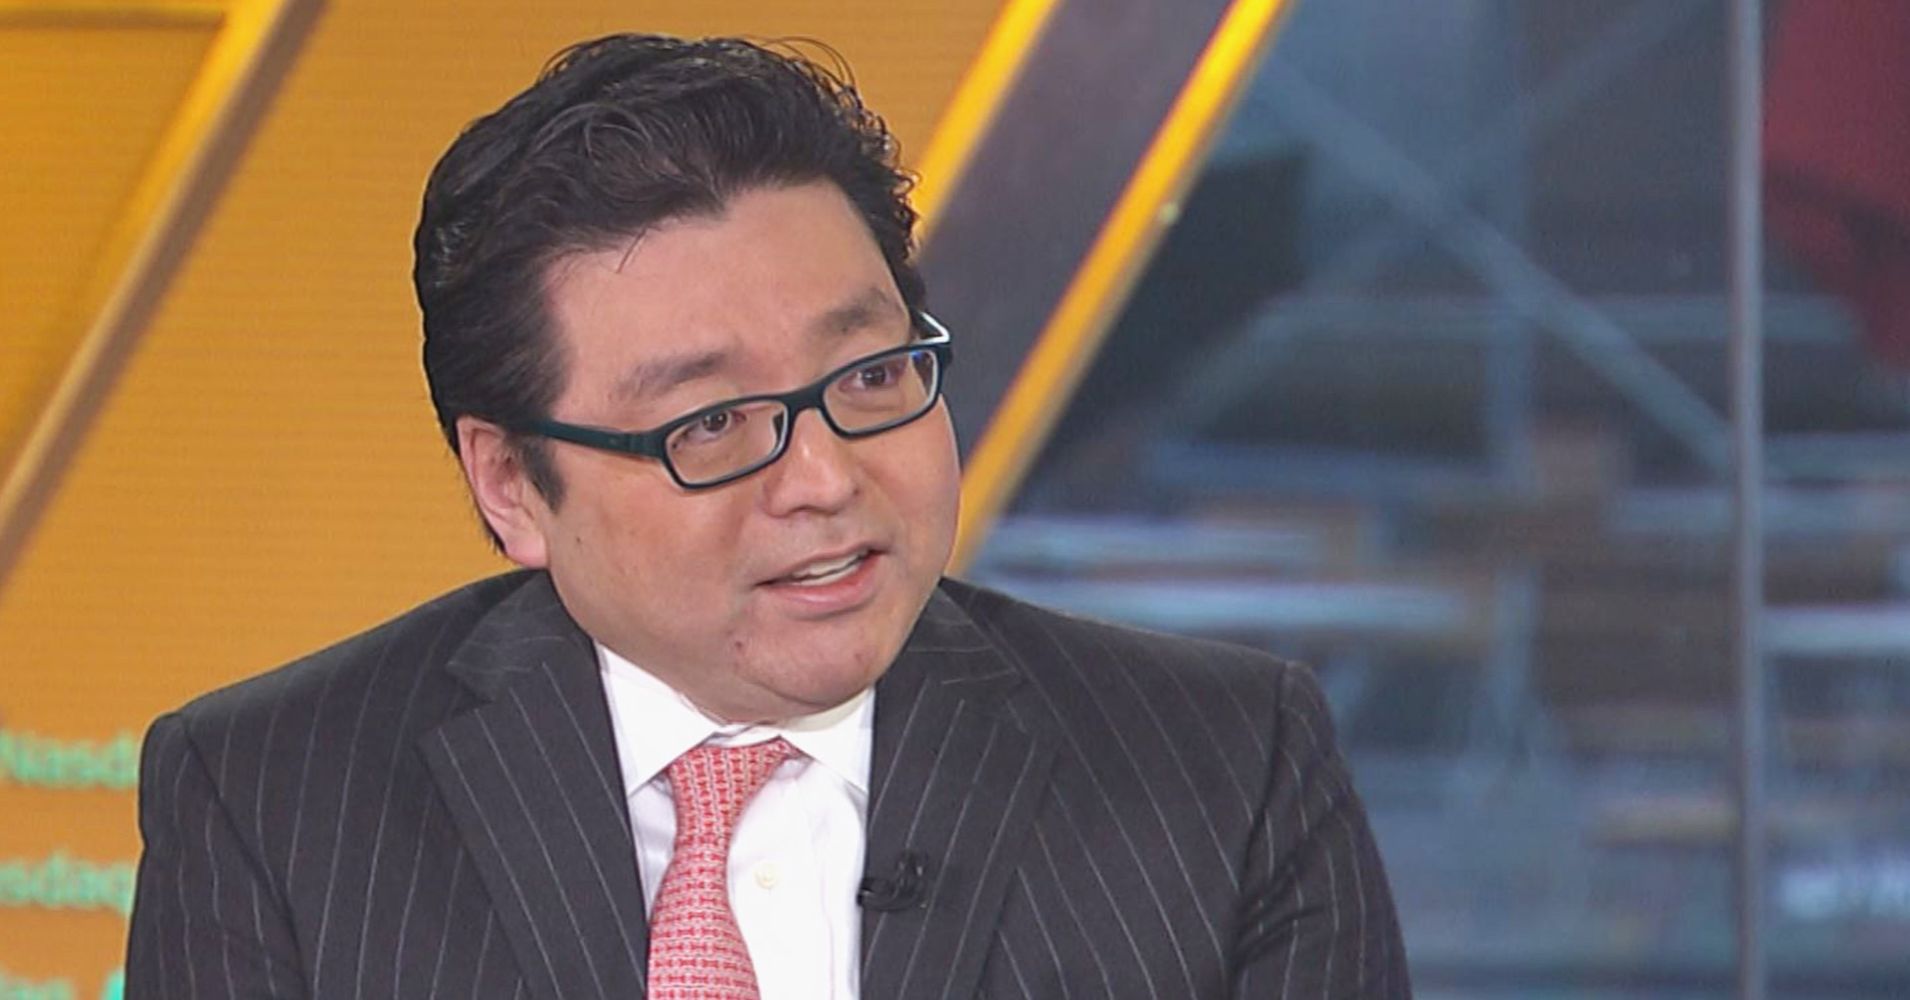 Bitcoin at $15,000 – Tom Lee Stands Firmly on Price Prediction Despite Current Decline 13